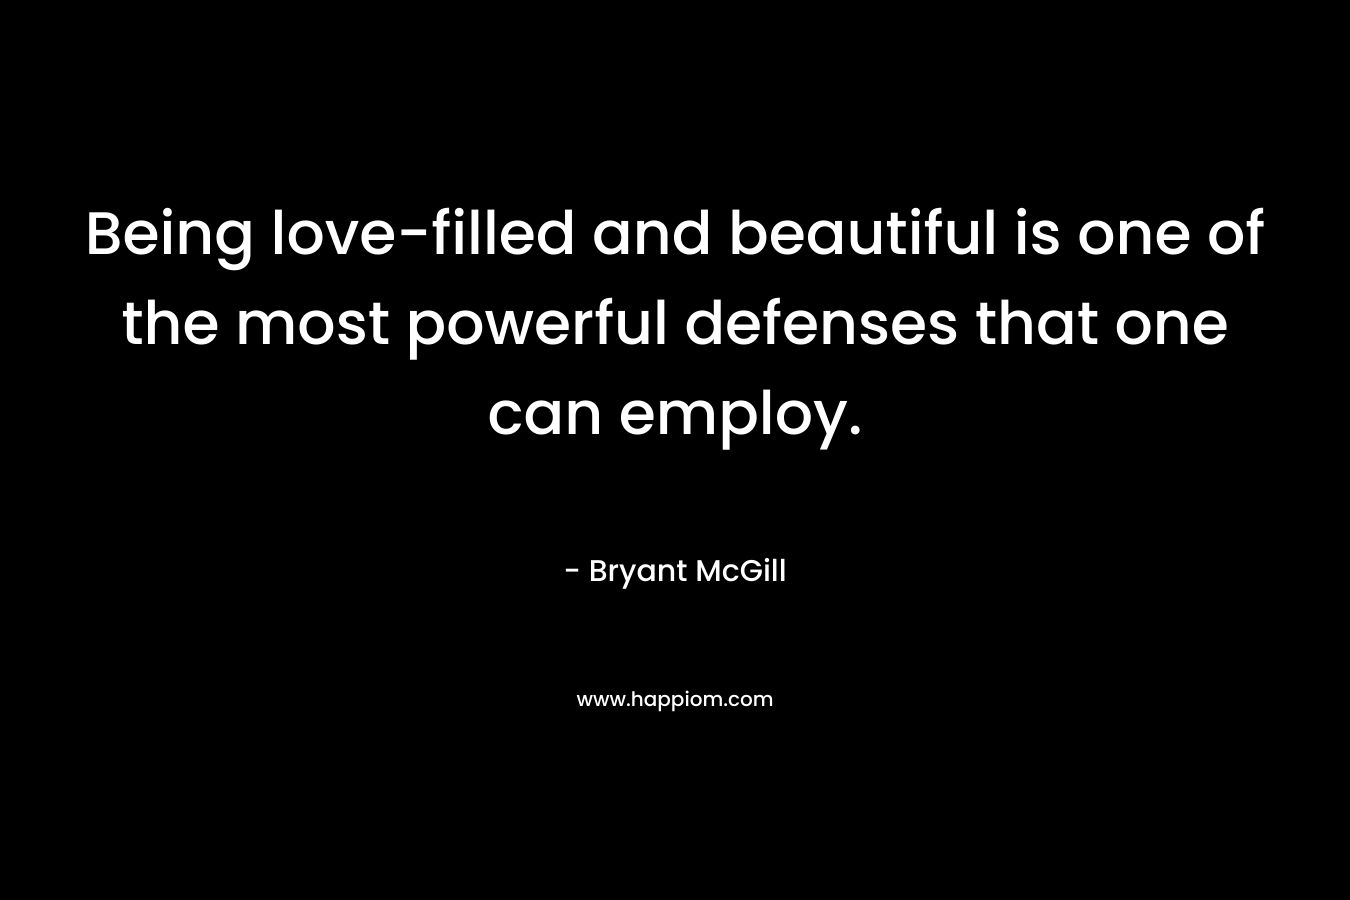 Being love-filled and beautiful is one of the most powerful defenses that one can employ. – Bryant McGill